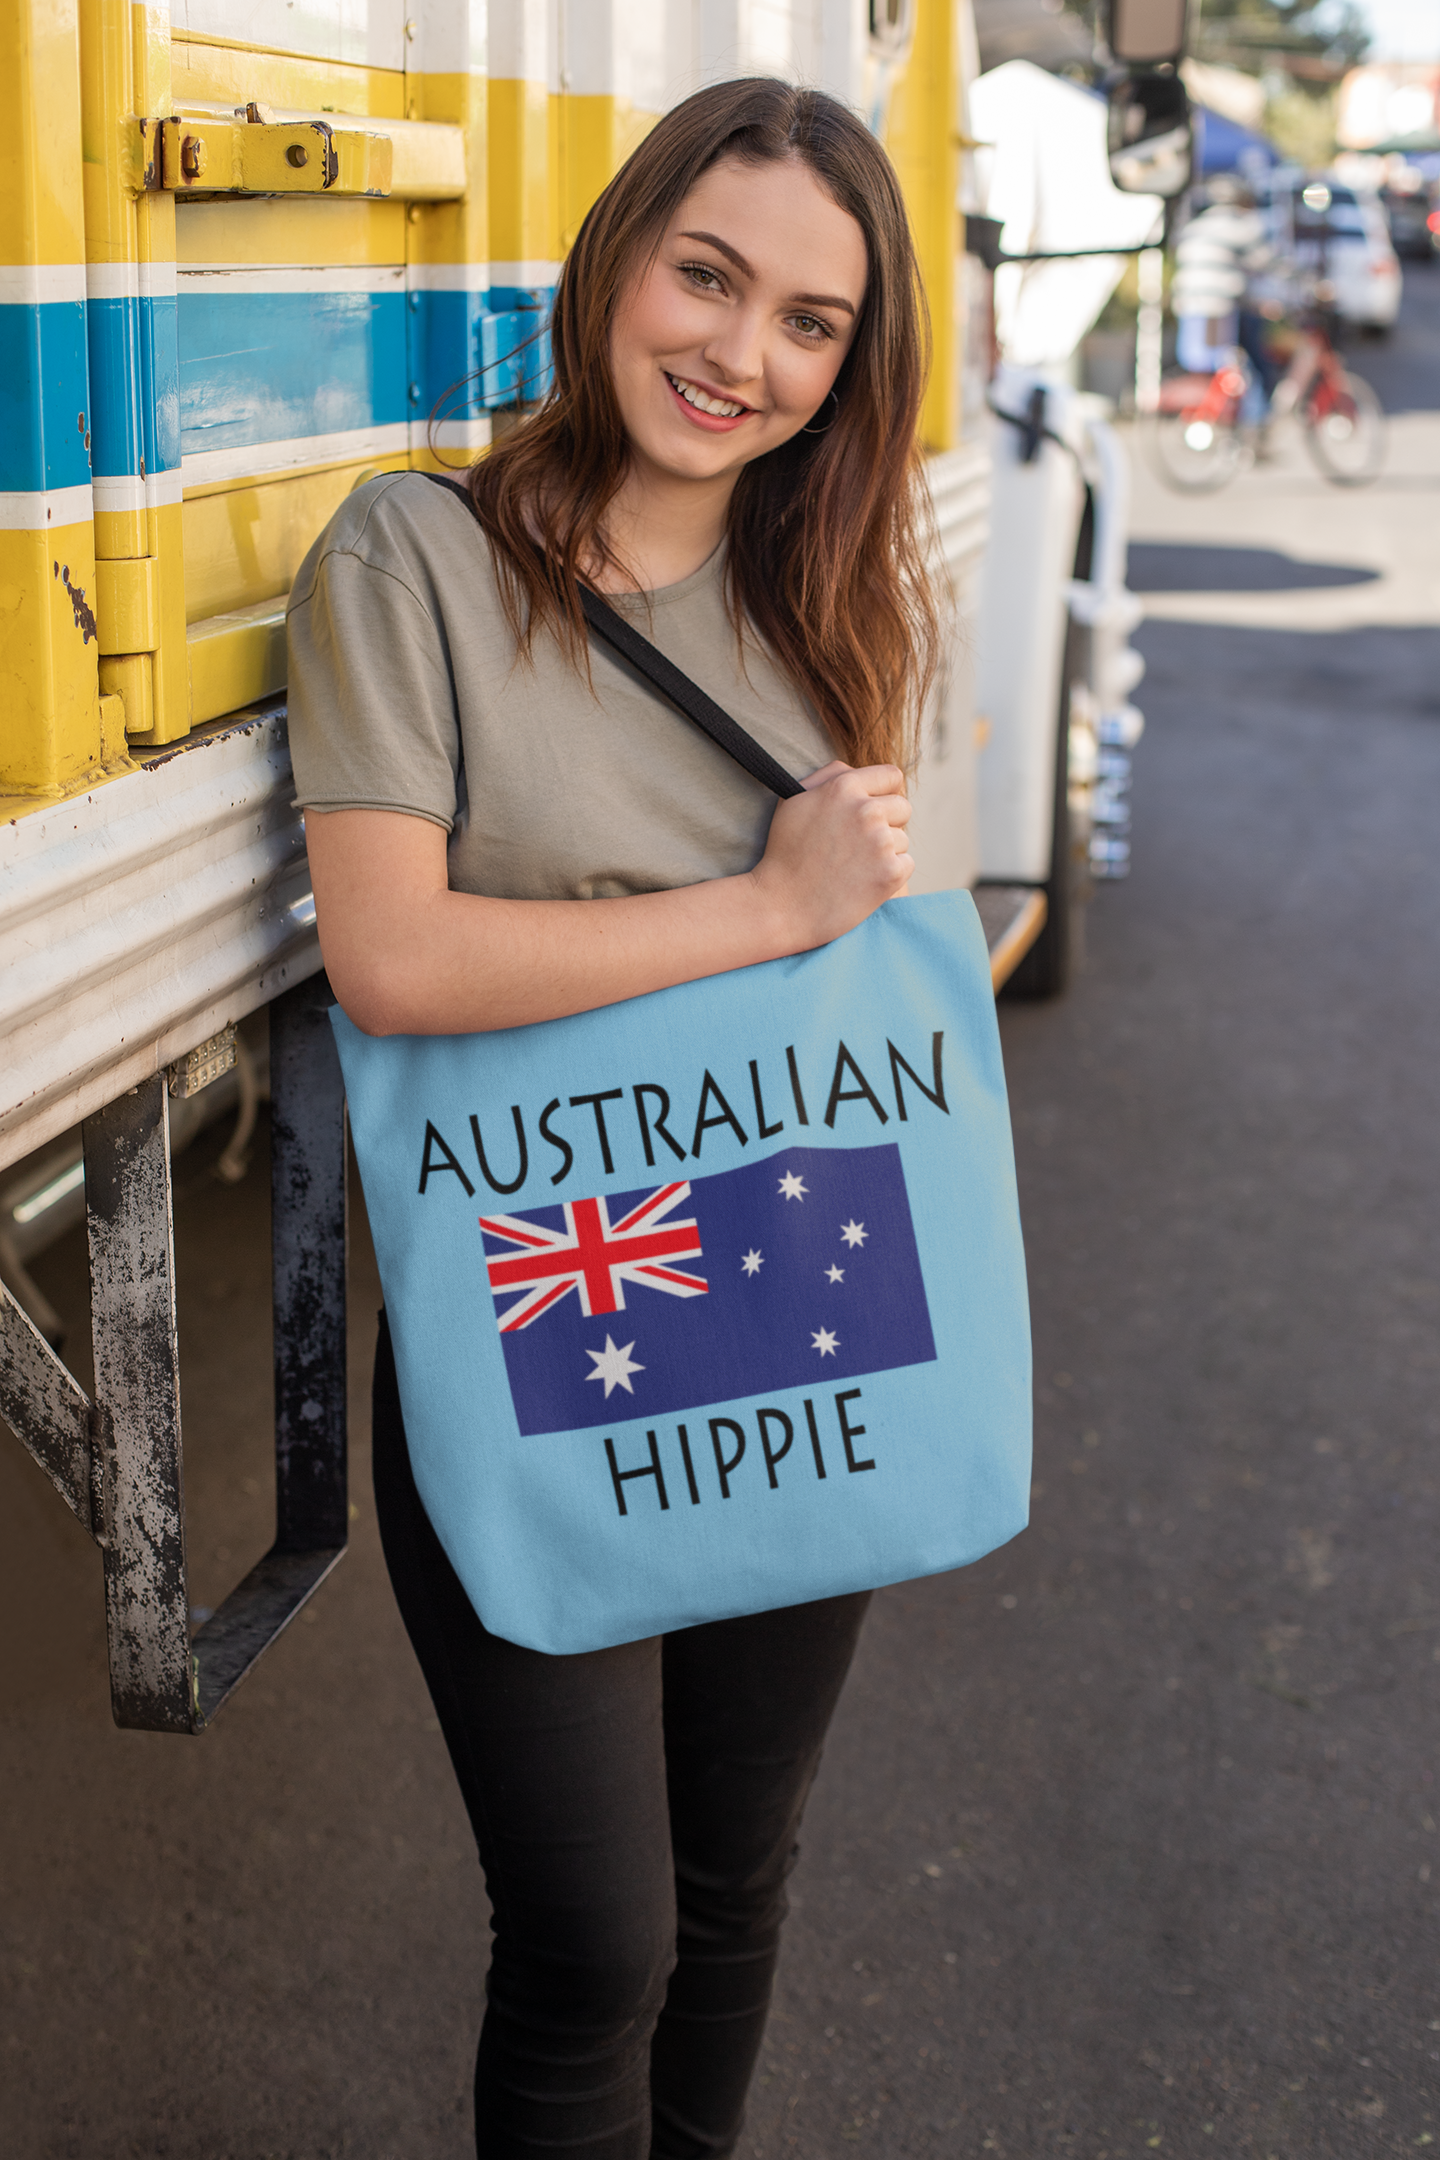 The Stately Wear Australian Flag Hippie tote bag has bold colors from the Australian flag.  Environmentally friendly tote bag made with biodegradable inks & dyes and made one-at-a-time.  3 practical sizes so it is perfect as a great gym bag, beach bag, yoga bag, Pilates bag and travel bag.